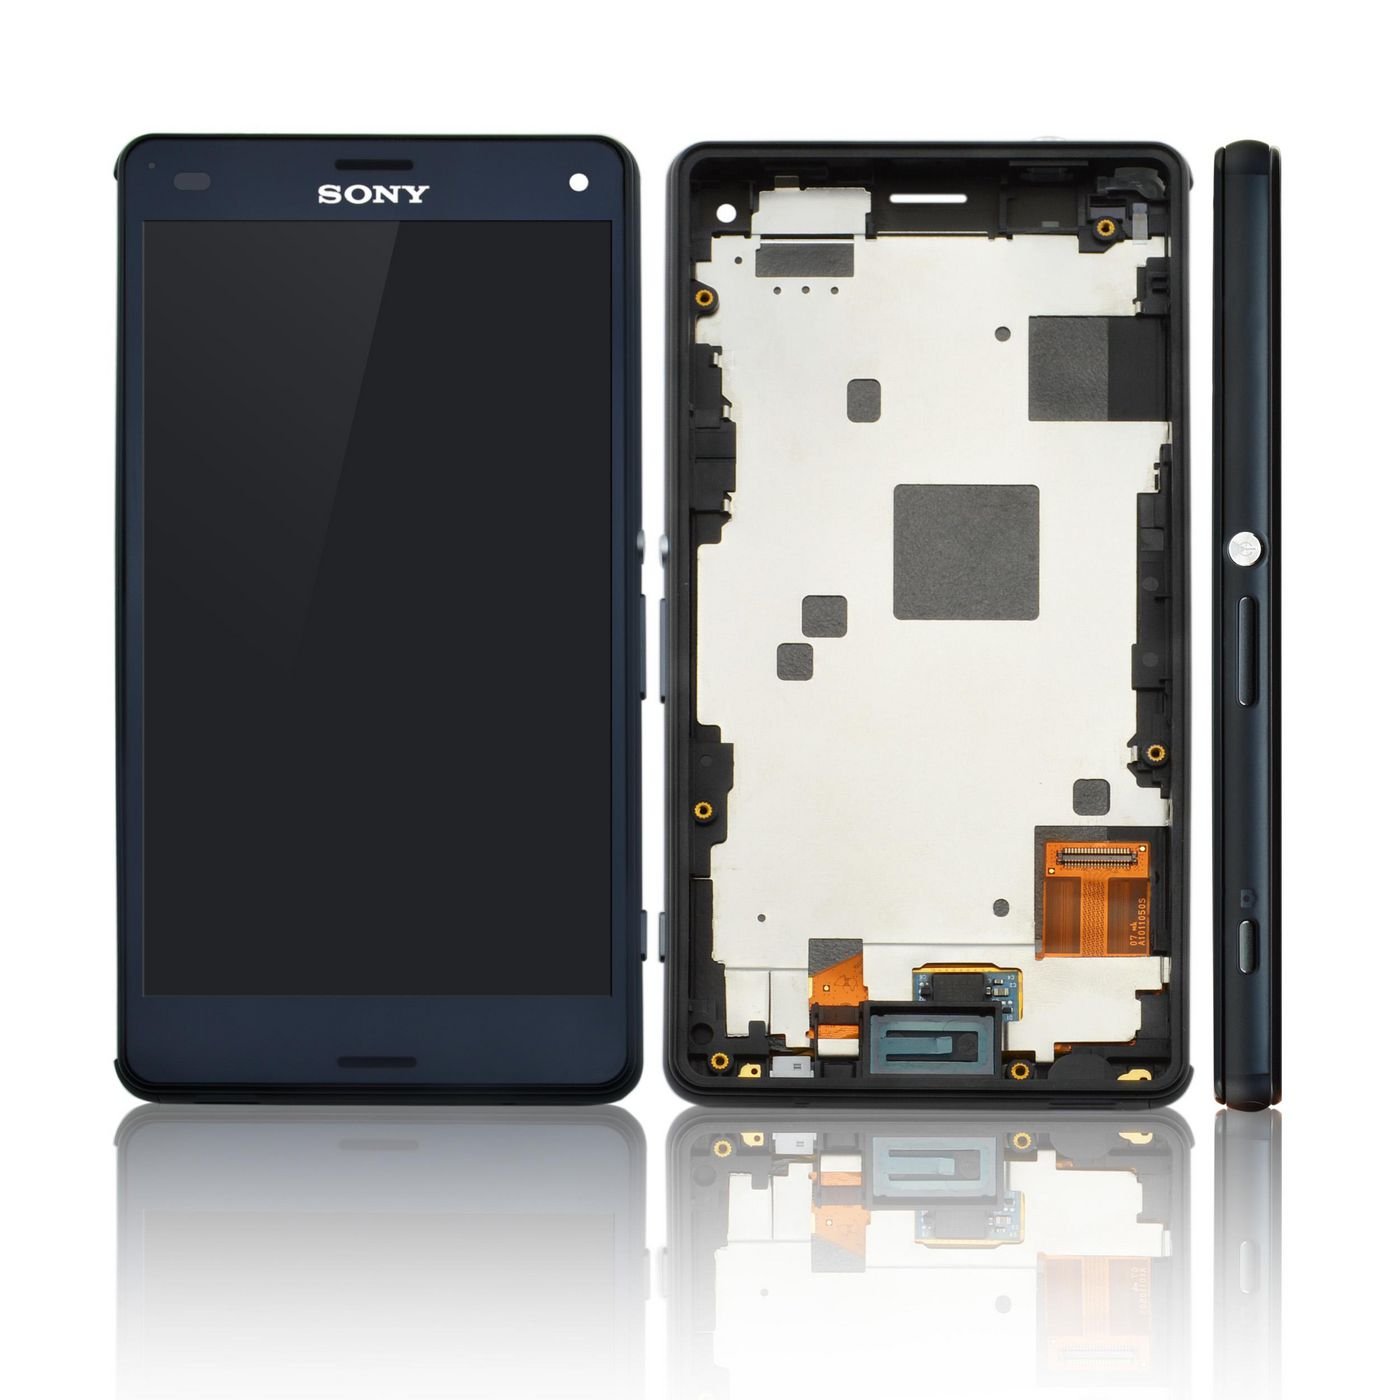 CoreParts MSPP72277 Sony Xperia Z3 Compact LCD 